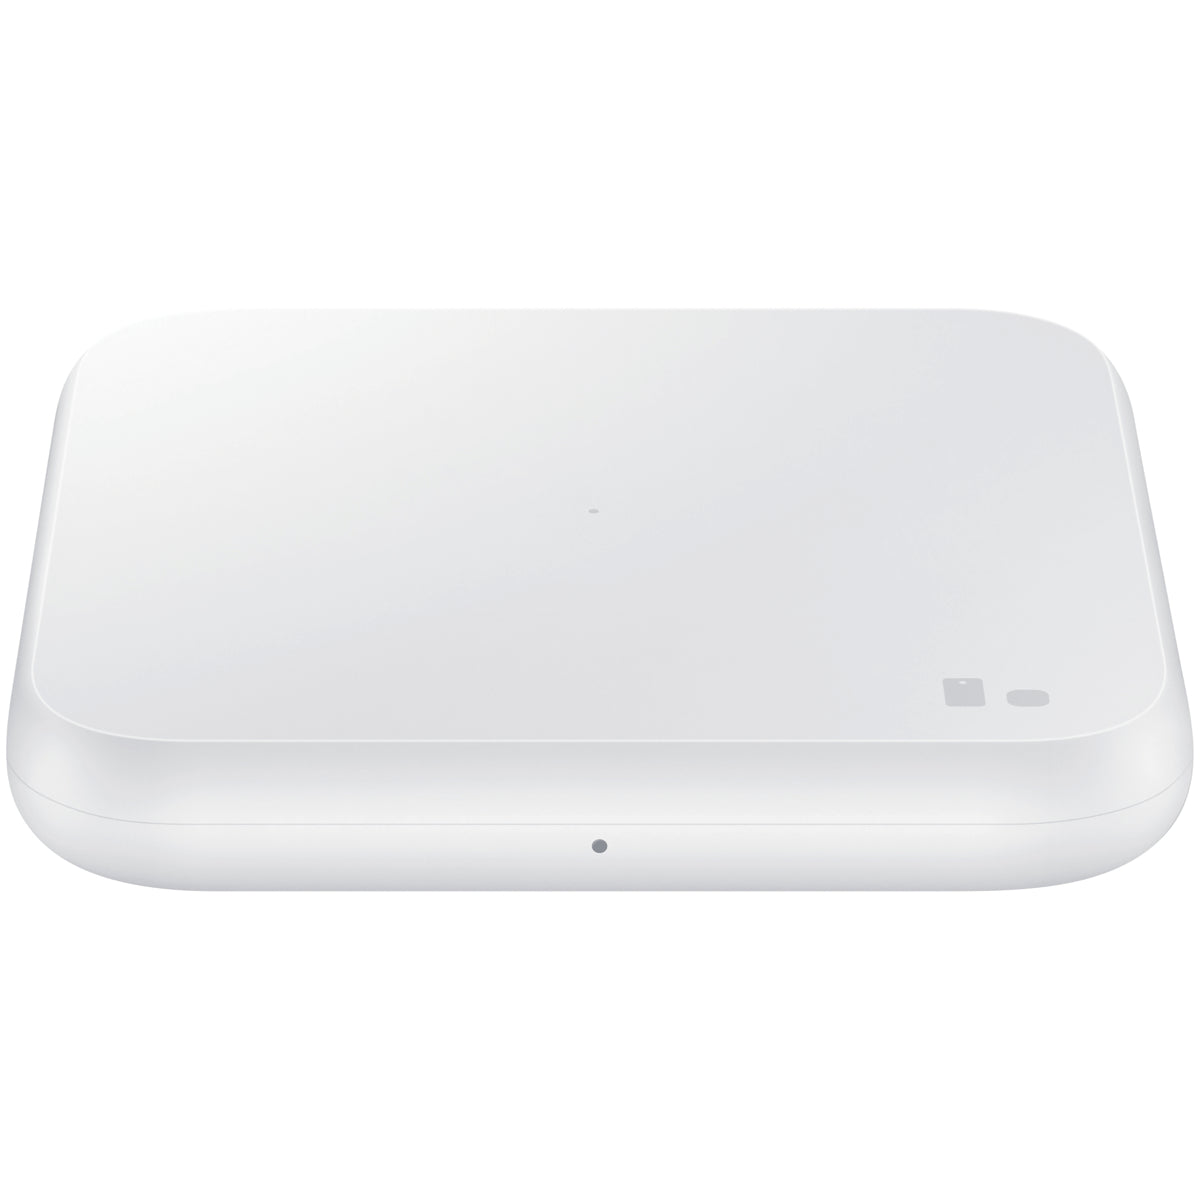 Samsung Wireless Charger and Charger Pad - White